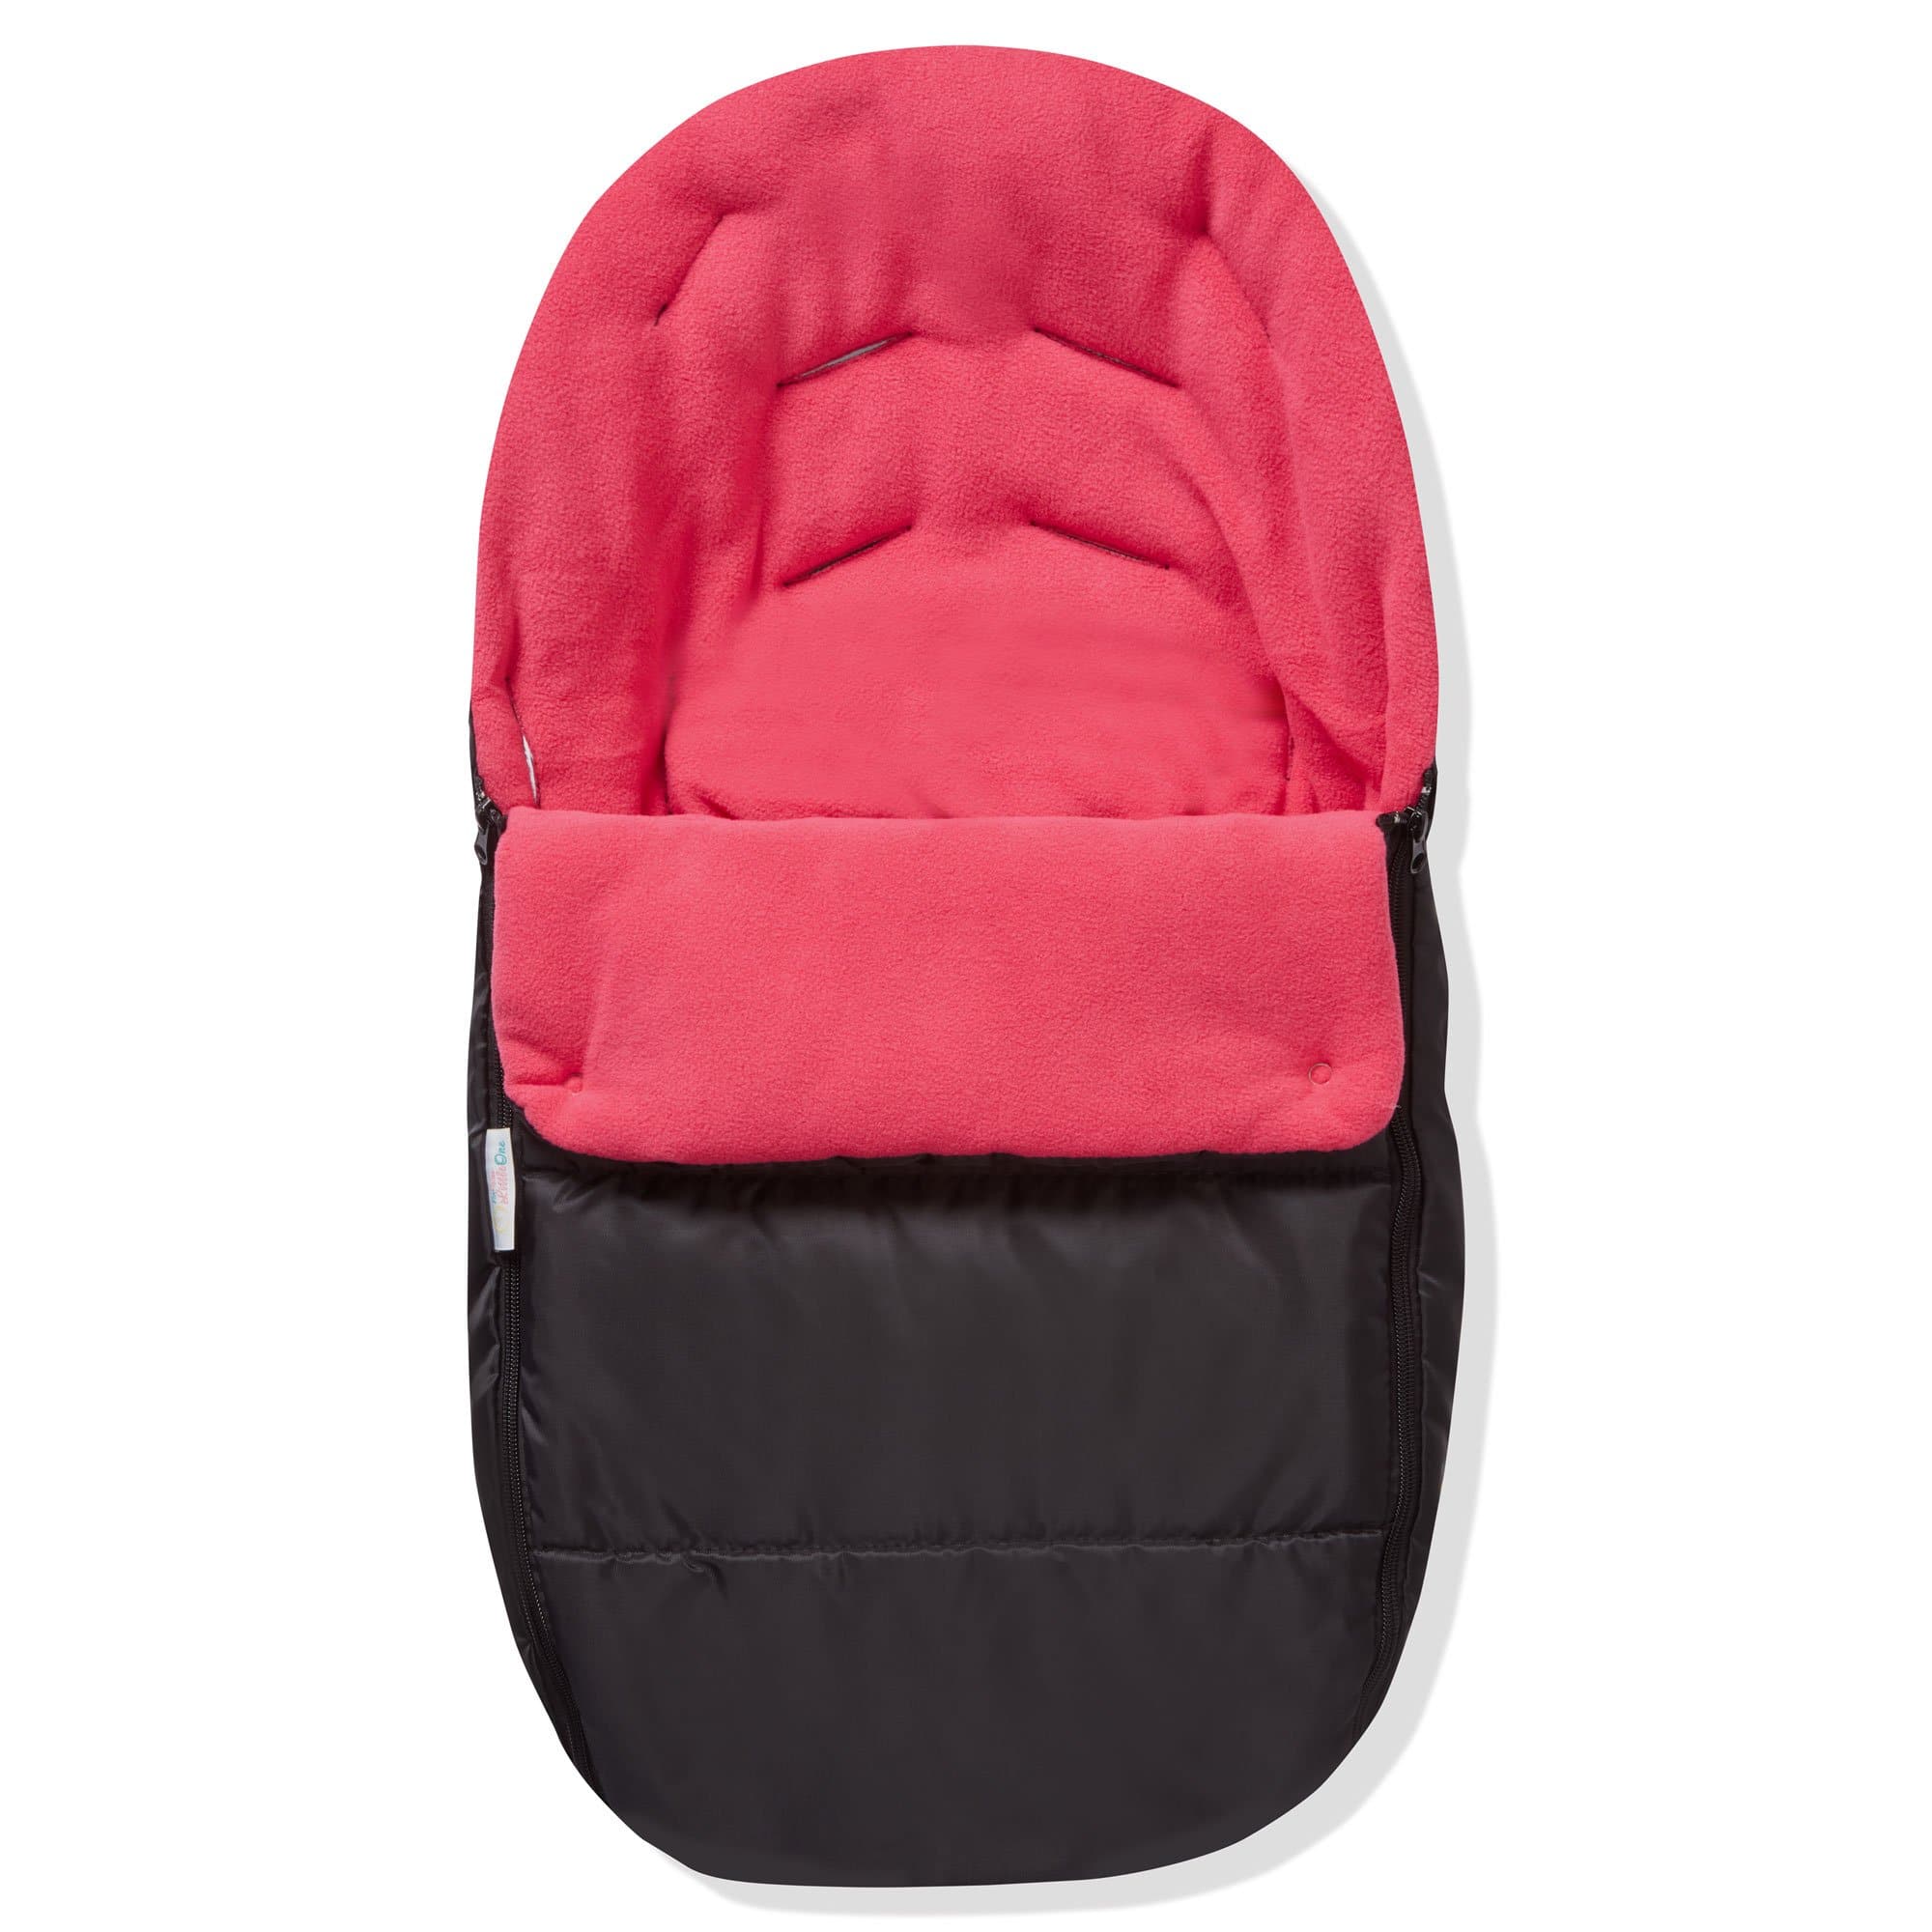 Premium Car Seat Footmuff / Cosy Toes Compatible with Doona - Pink Rose / Fits All Models | For Your Little One